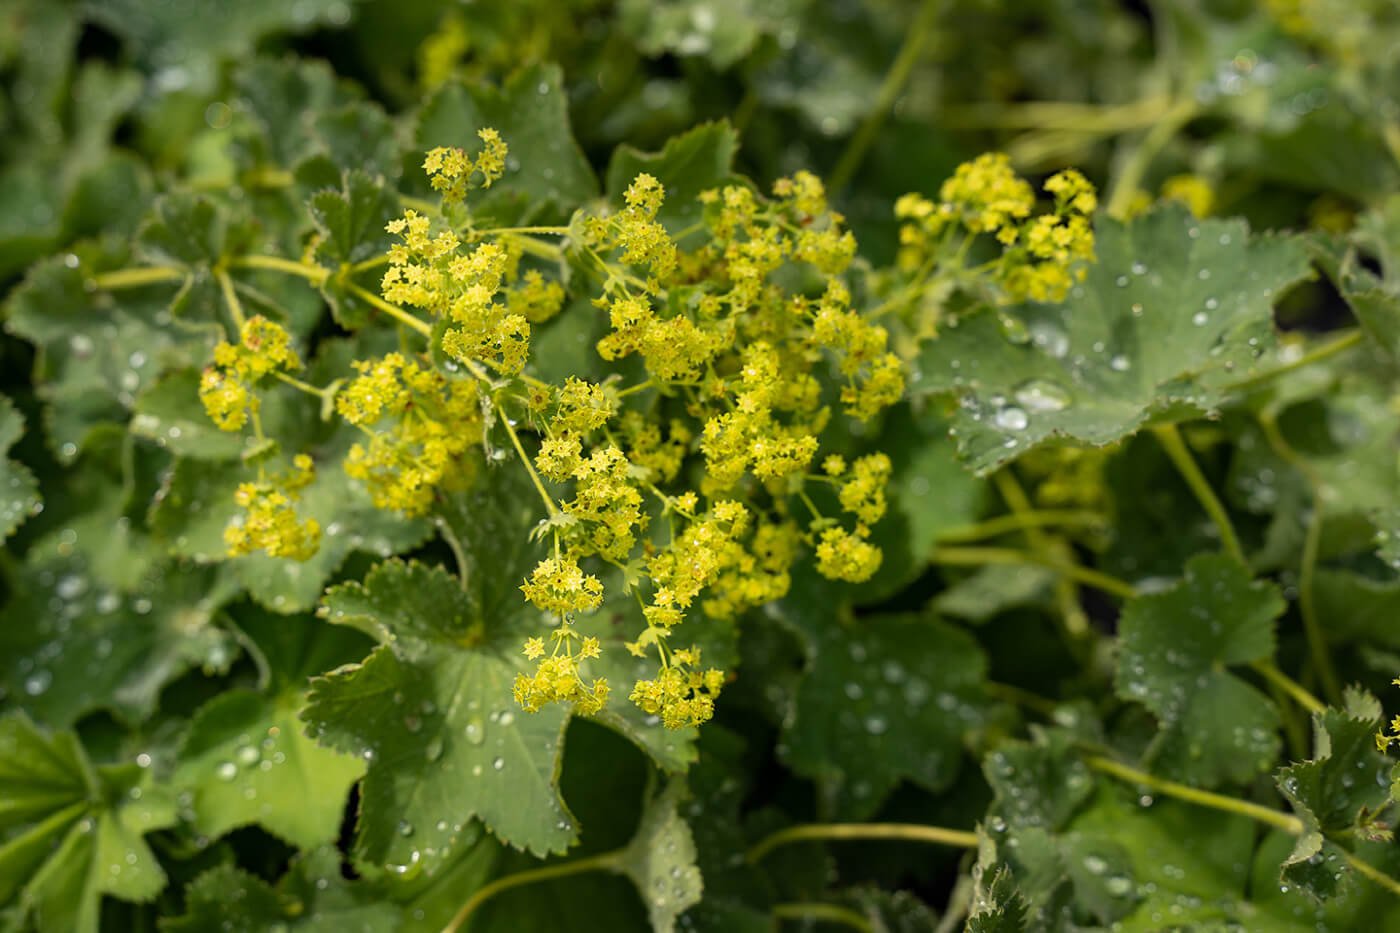 Lady's Mantle in bloom